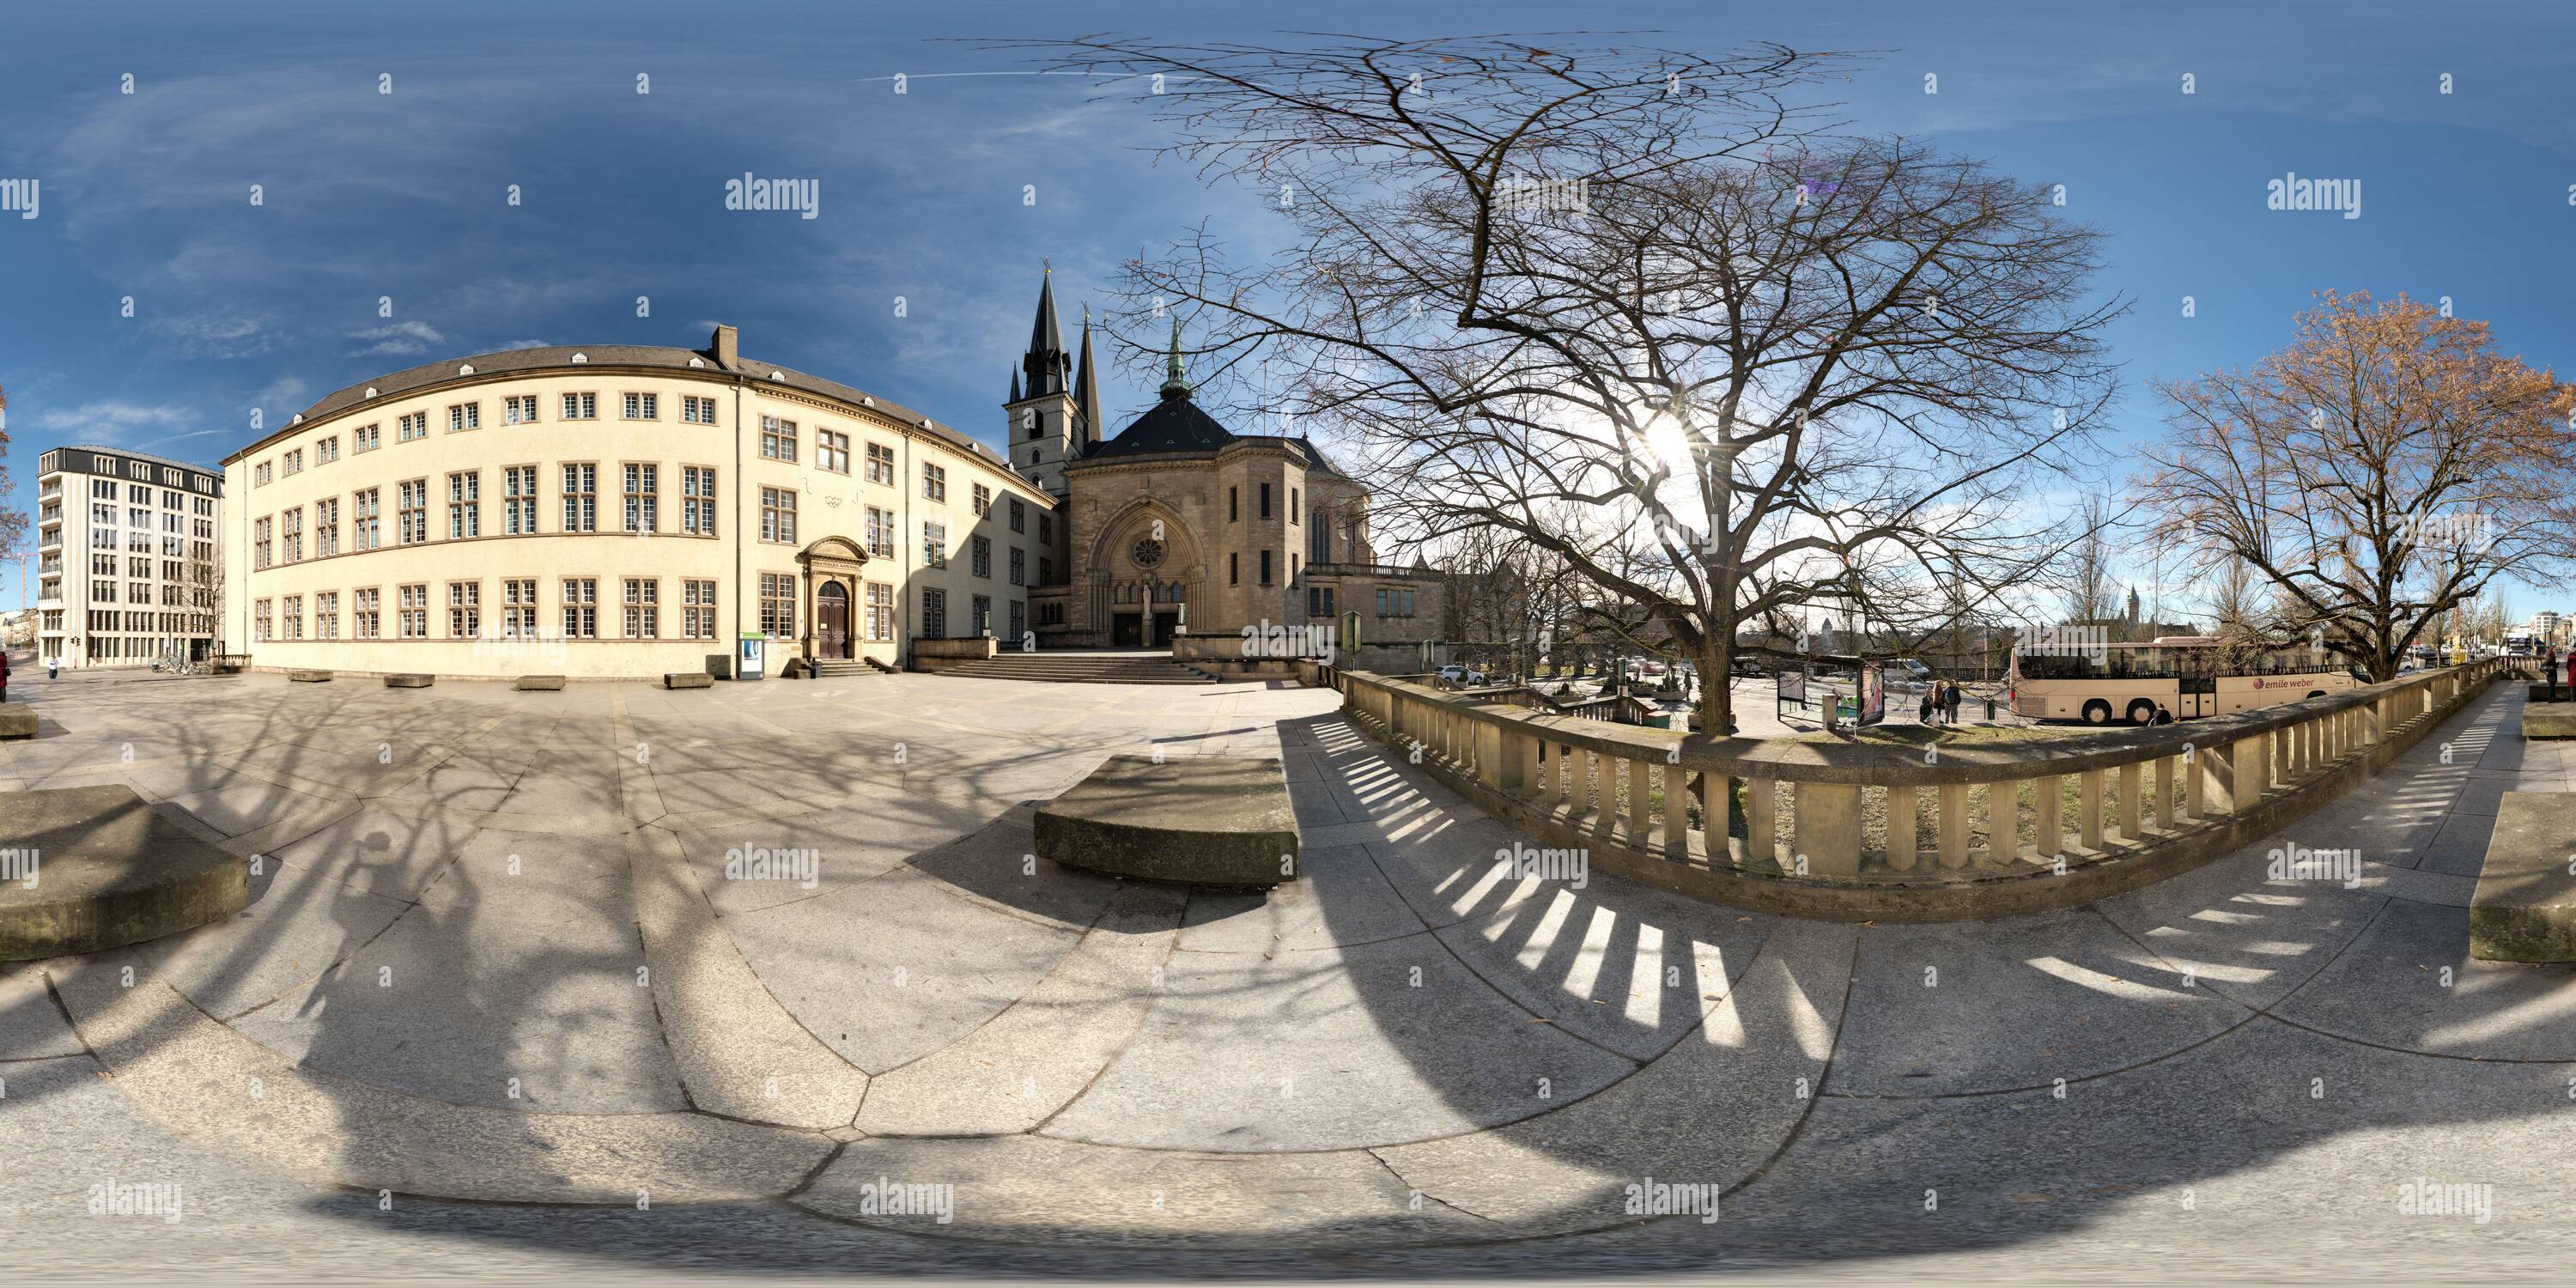 360 degree panoramic view of Luxembourg City - Notre Dame Cathedral